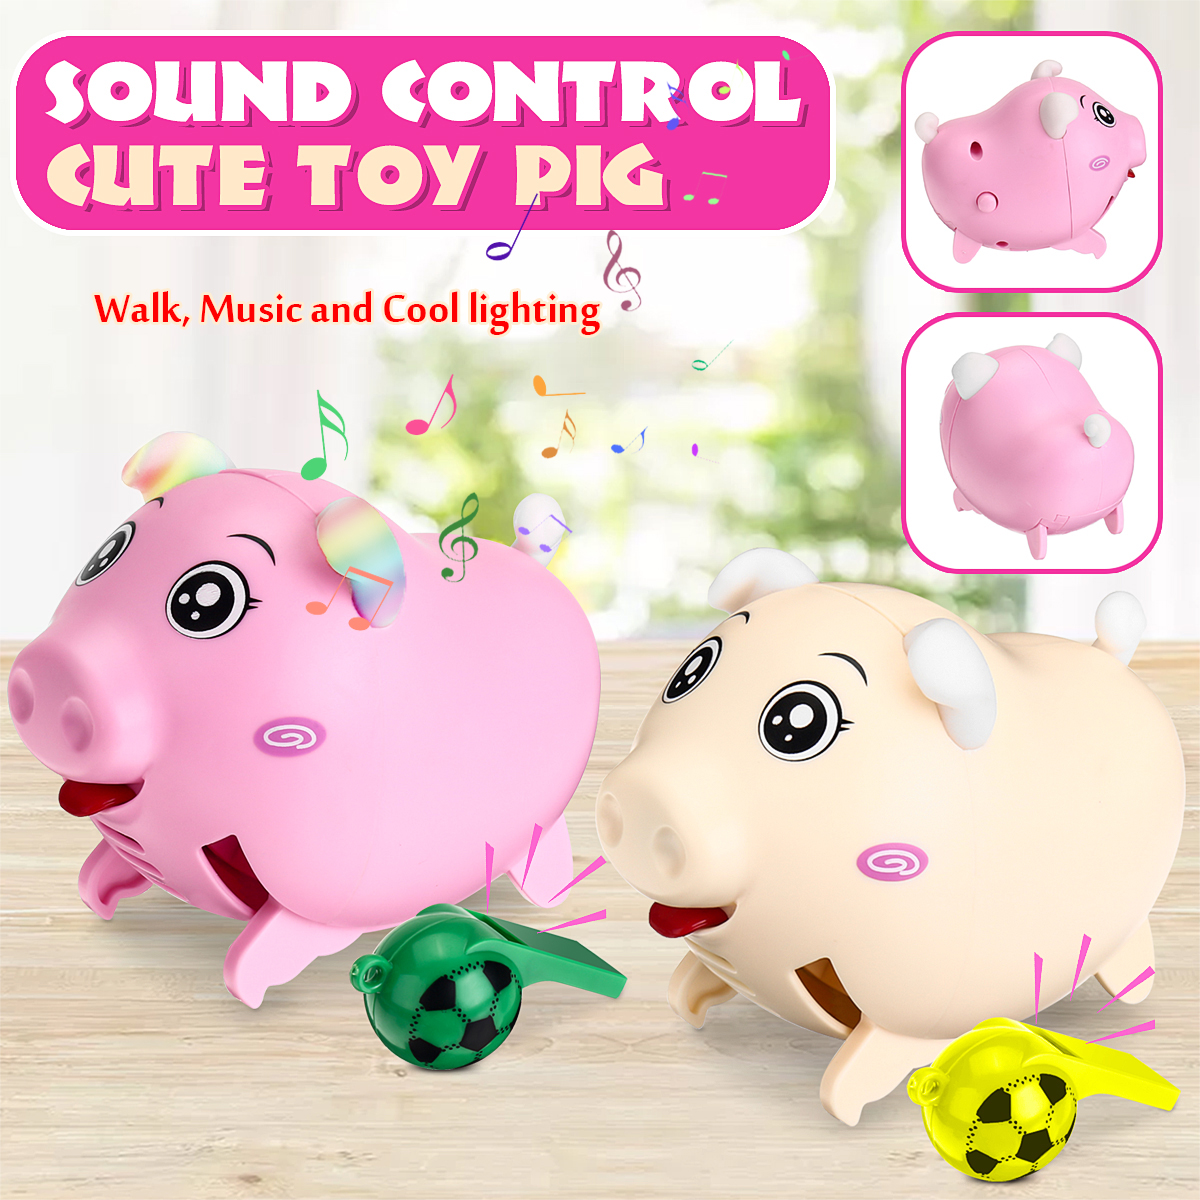 Kids-Toys-Animals-Sound-Induction-Whistling-Pig-Electronic-Pig-Interactive-Walking-Electronic-Toy-1662056-1